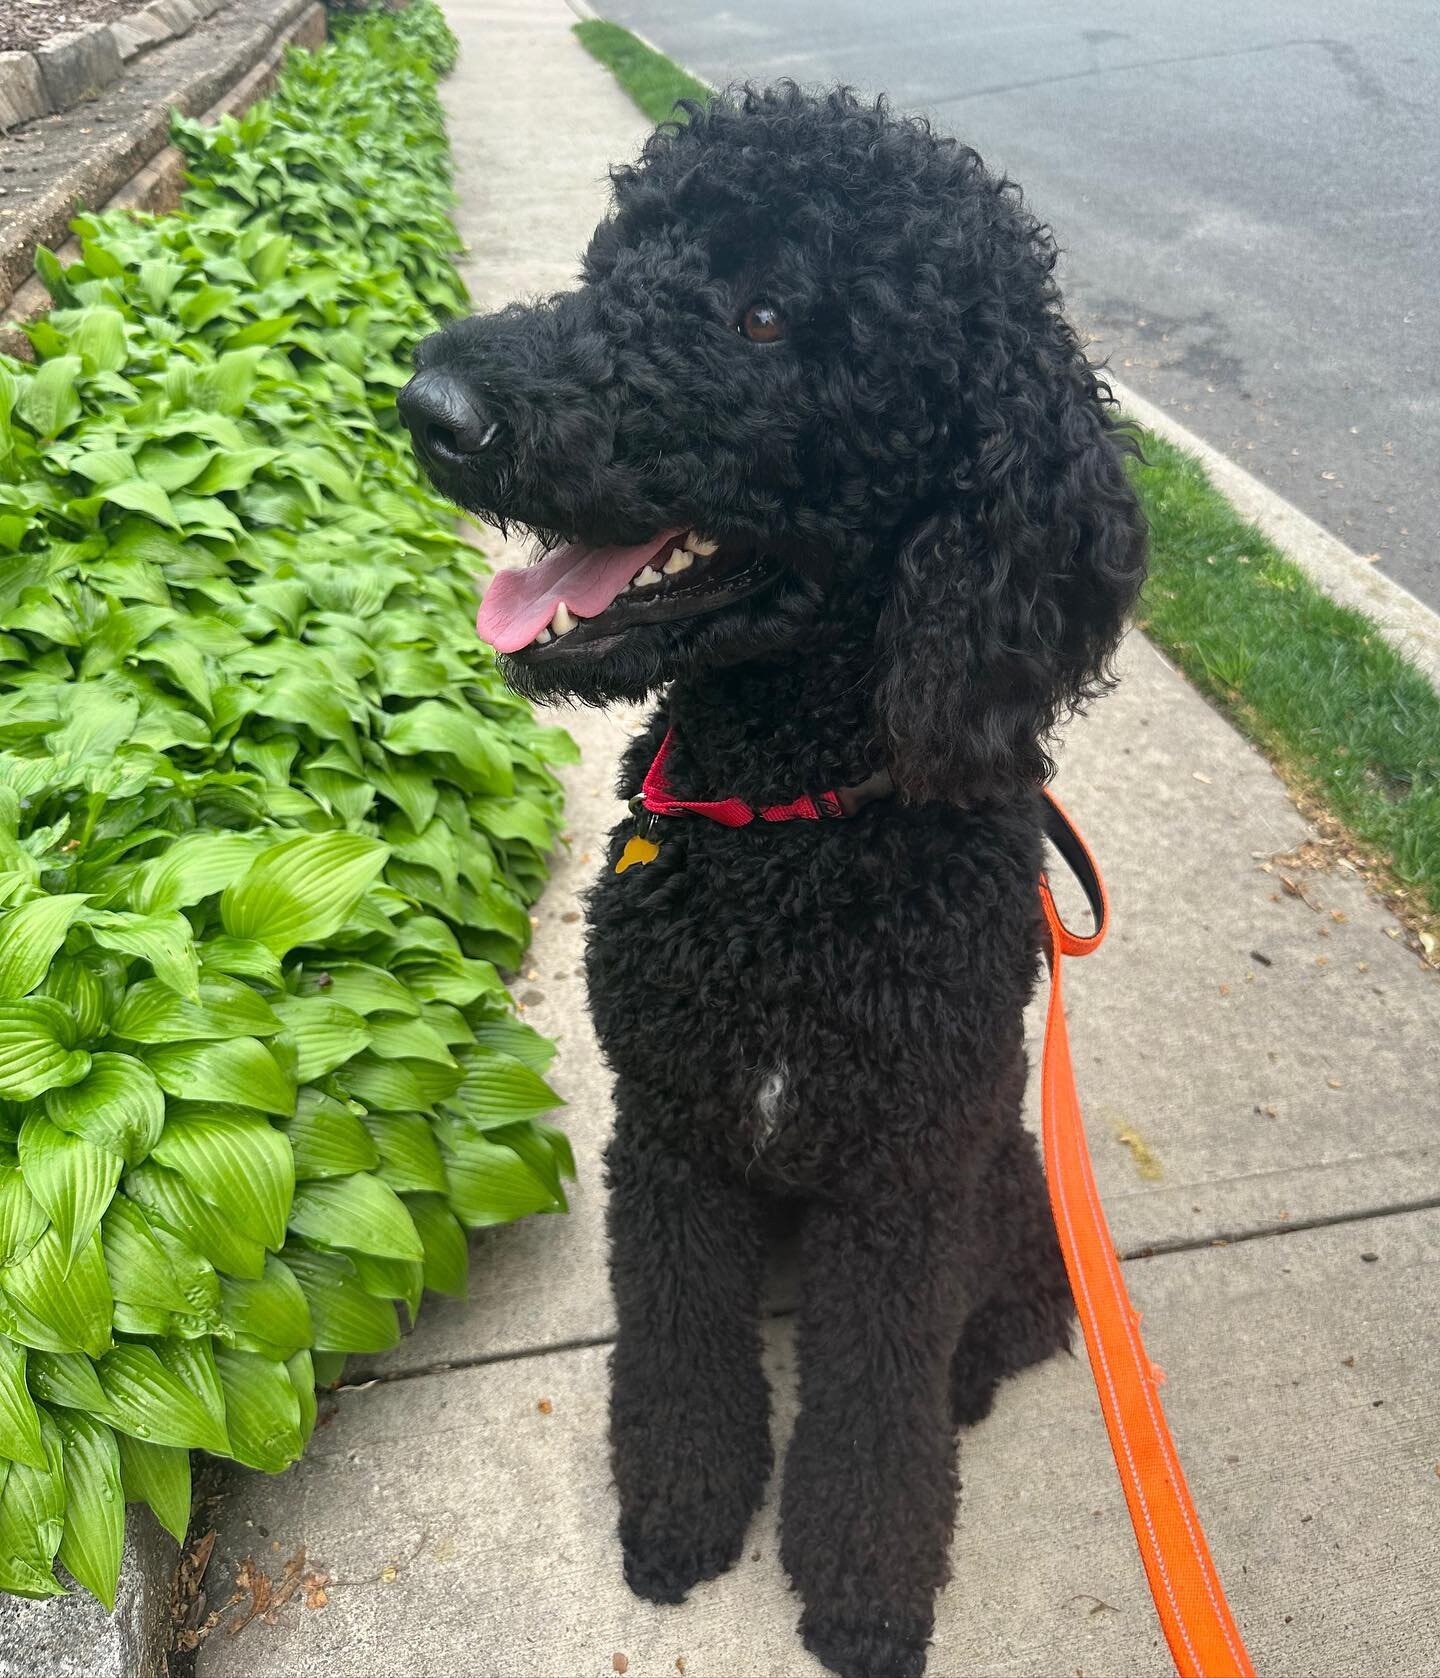 Meet Harley! 
This incredible 1.5 year old Standard Poodle is looking for his forever family. He came to us through another rescue when he was given up by his family due to long long work hours. 
His brother Davidson is also looking for his forever f